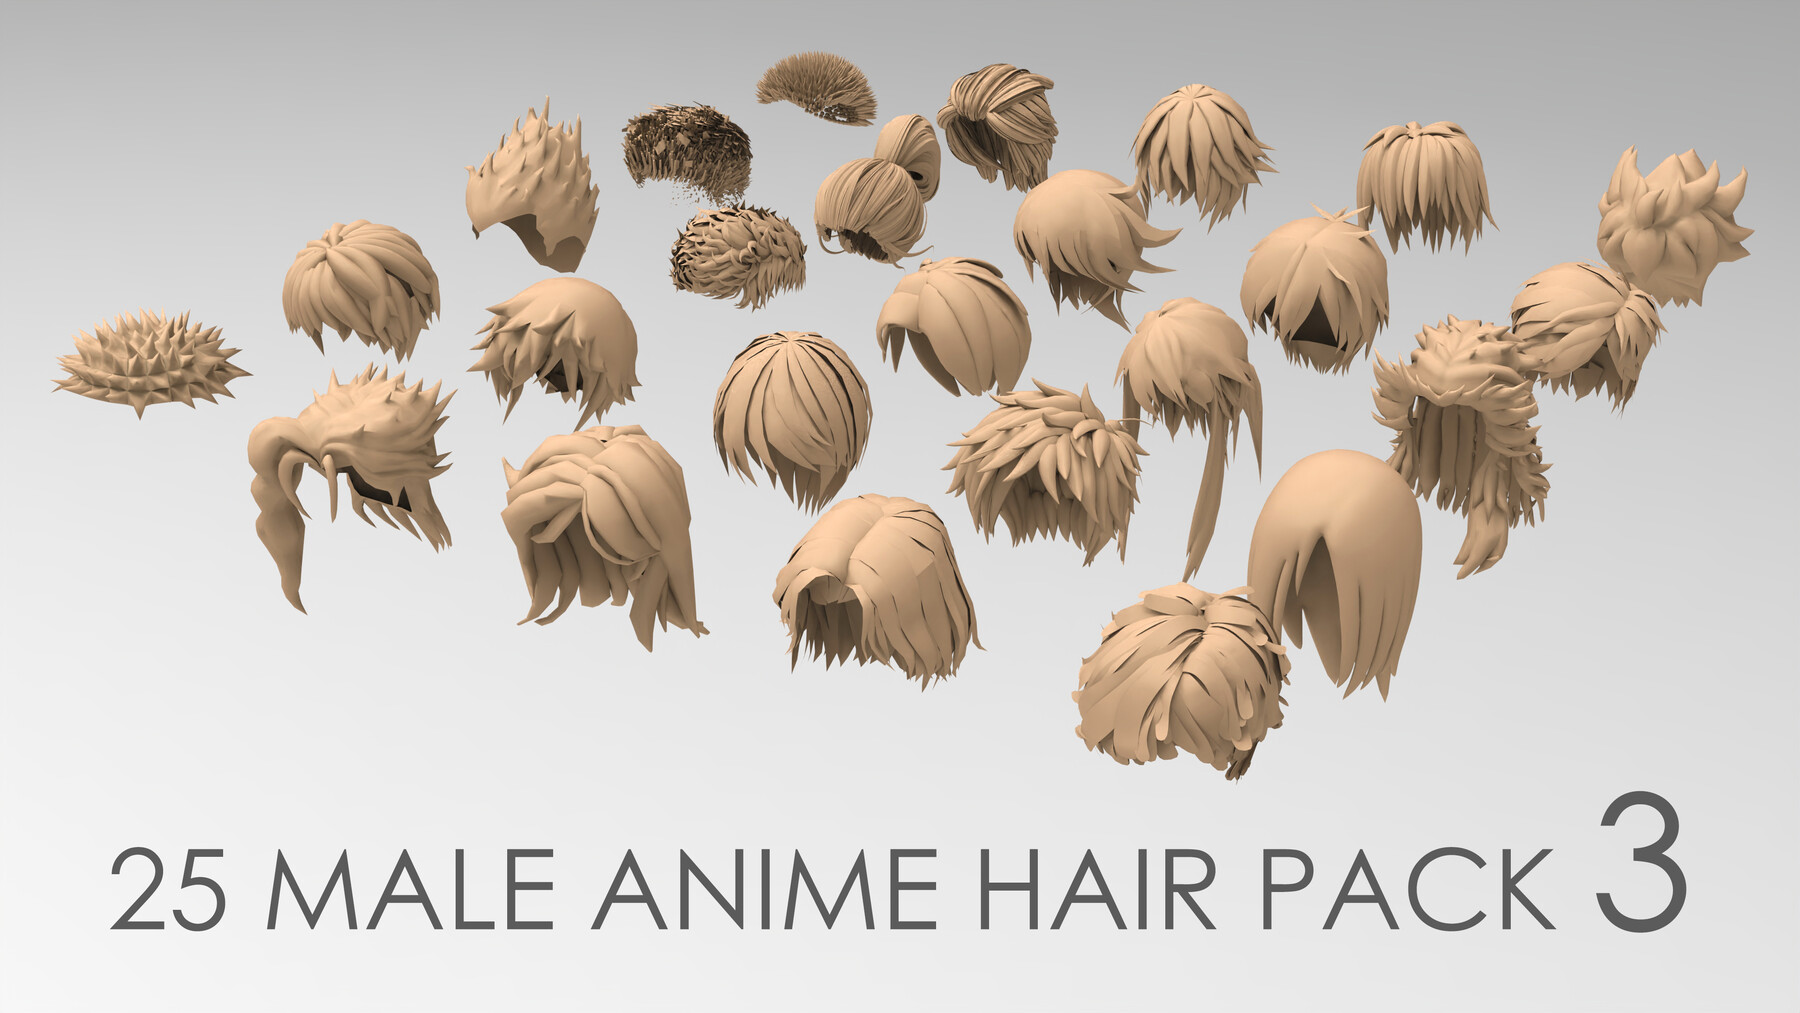 ArtStation - 25 male anime hair pack 3 | Resources